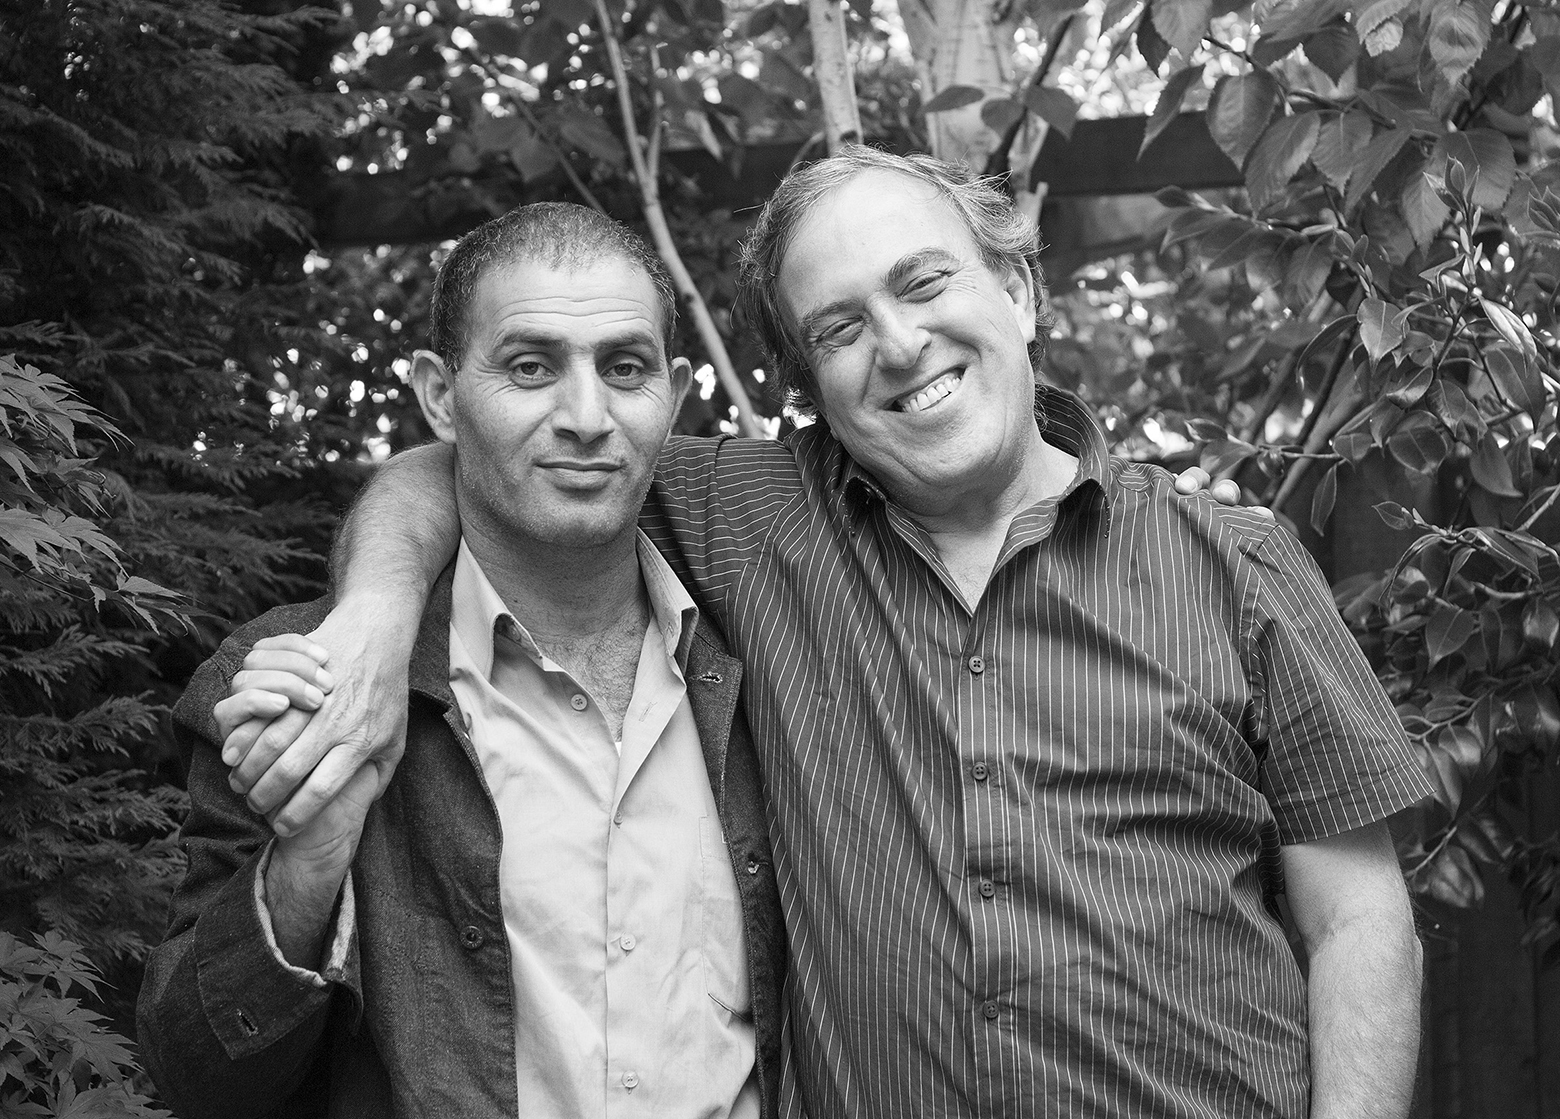 Bassam Aramin and Rami Elhanan in London on June 2013. Both men smile as they stand with their arm over the other’s shoulders. Aramin clasps Elhanan’s hand.